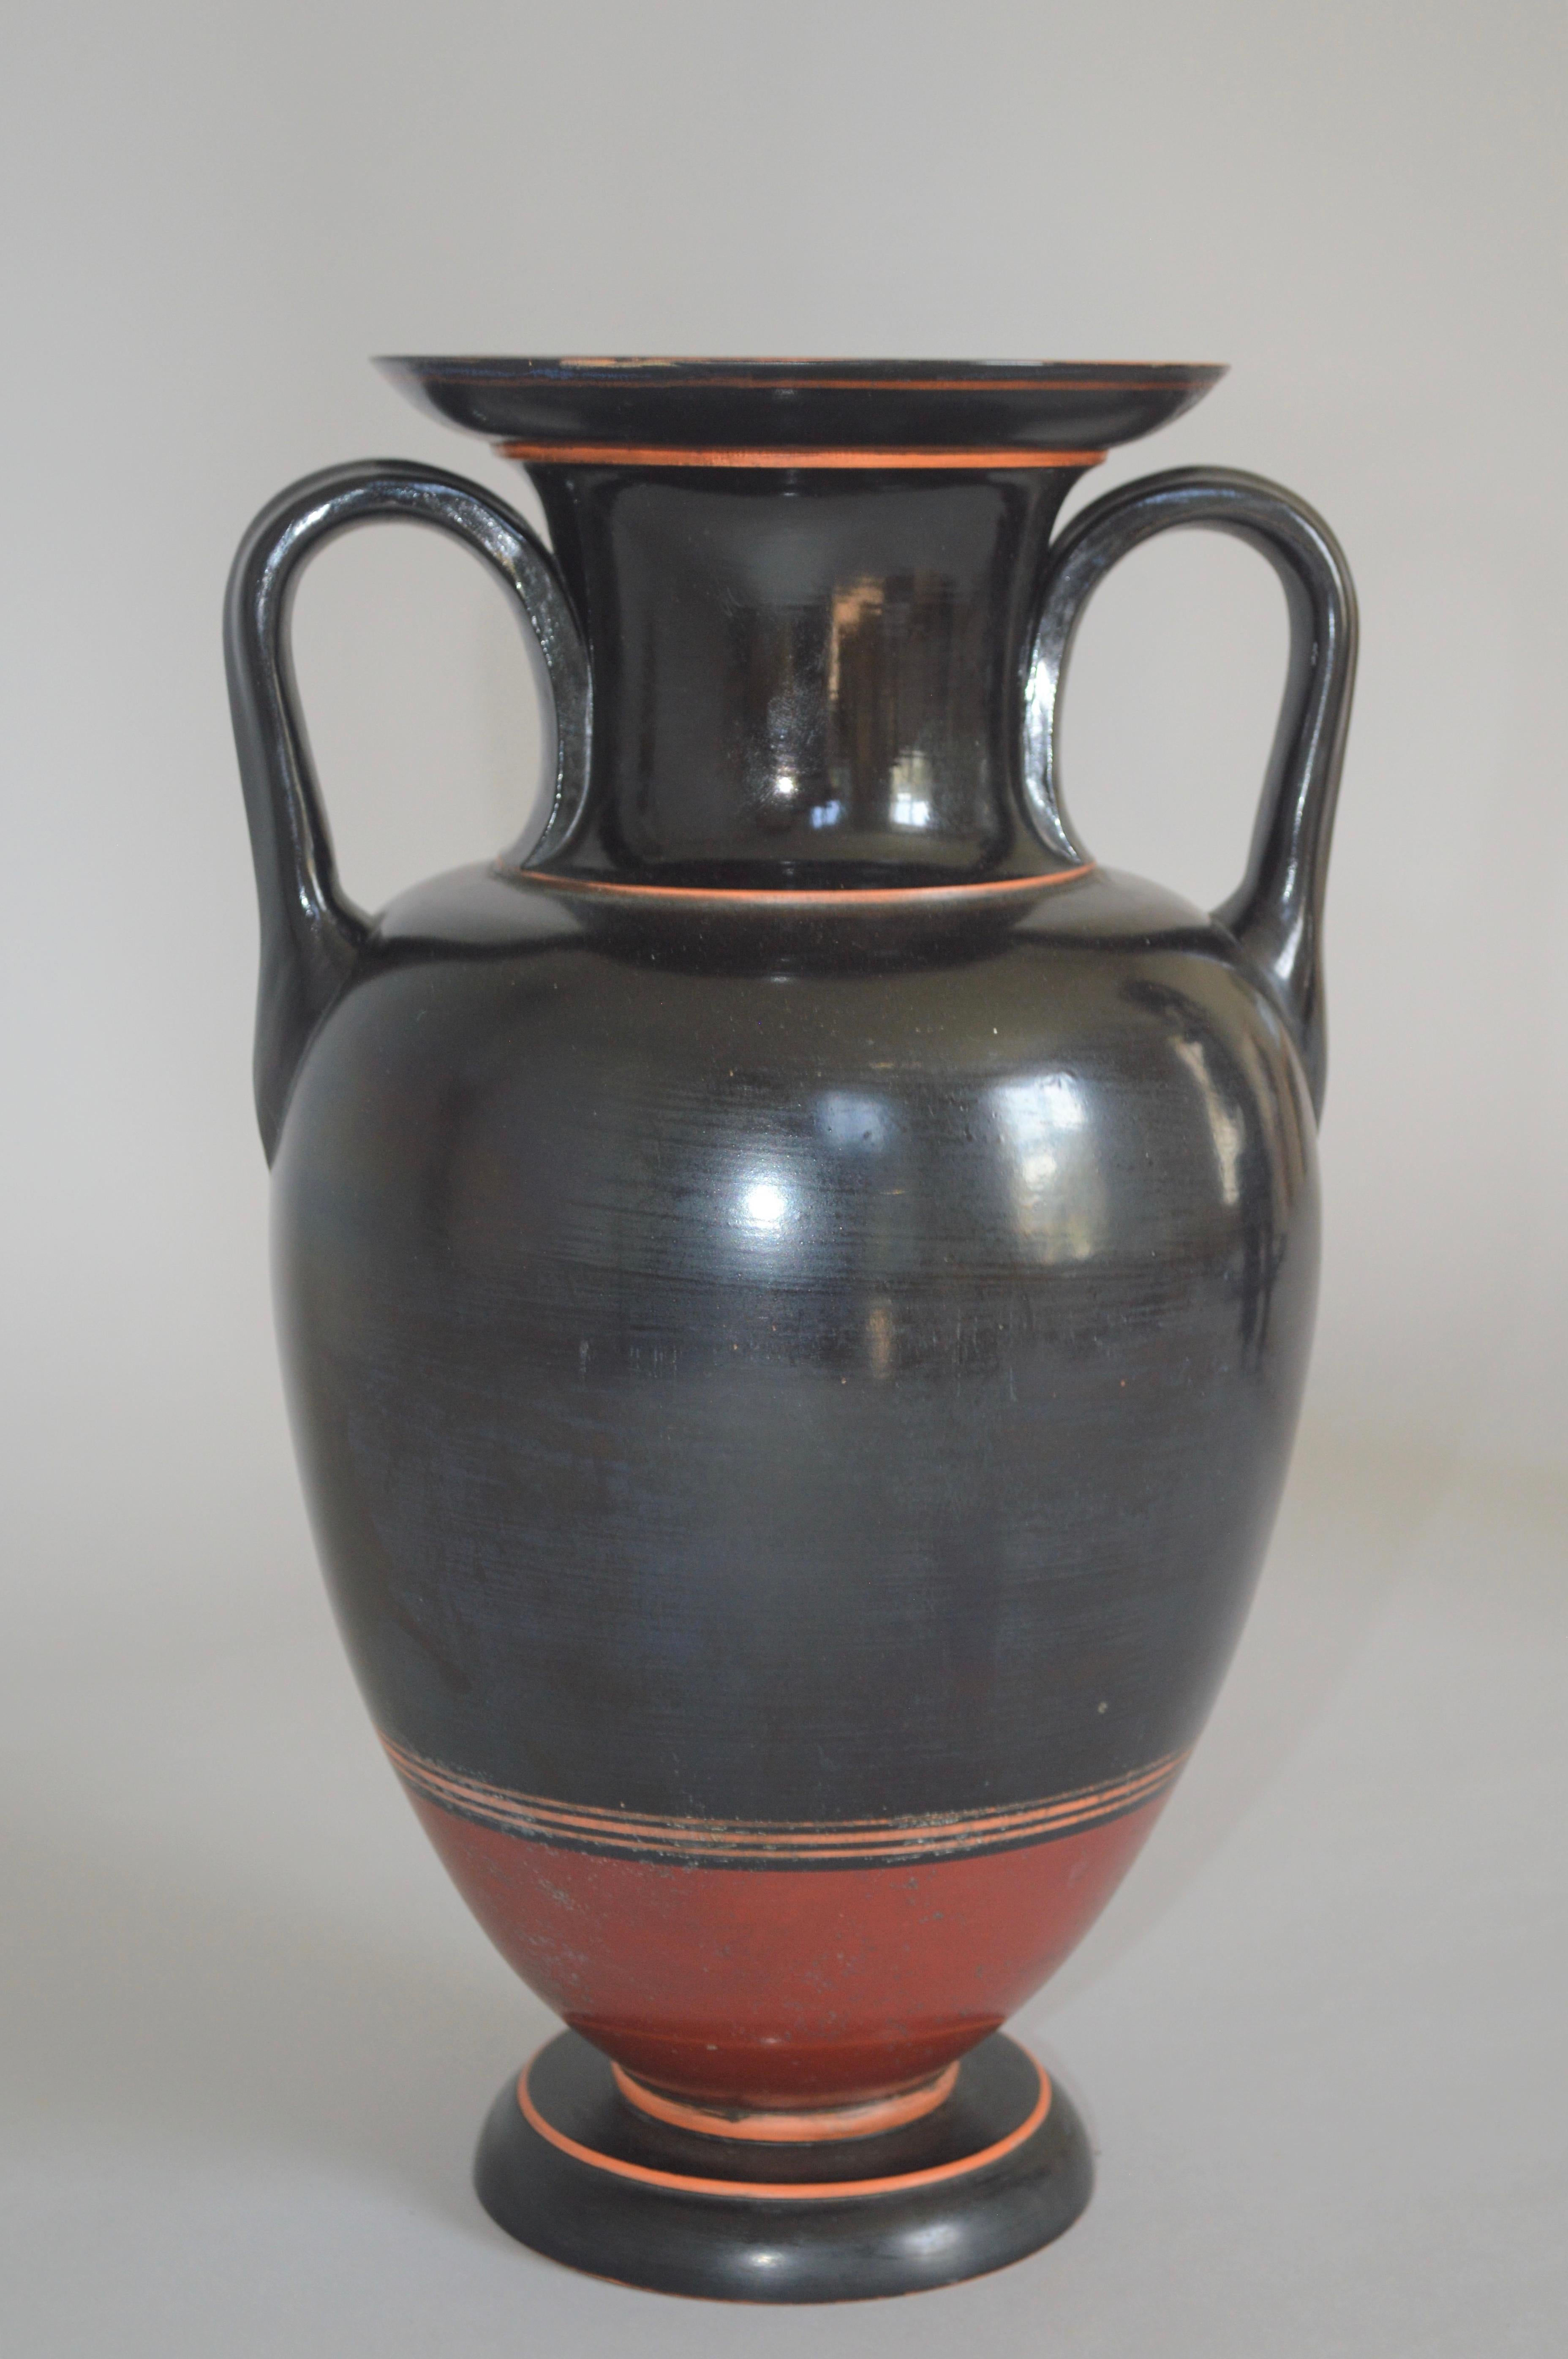 Classical Amphora vase in black painted terracotta with classical decoration in extremely high quality. Signed P. Ibsen Kjøbenhavn No 21 Denmark, 1870-1890.